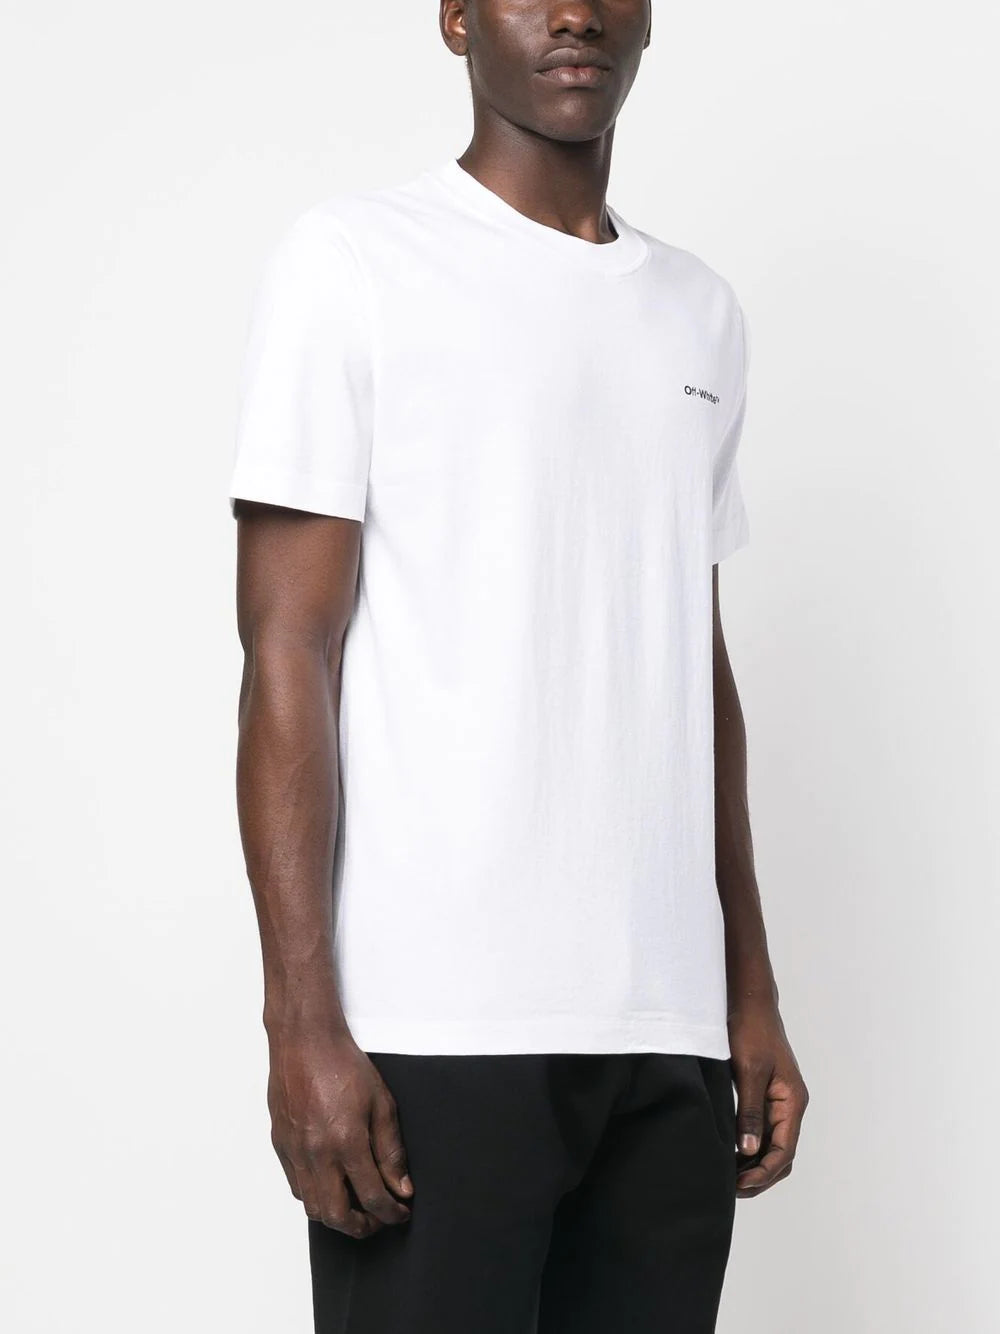 Off-White Wave Outline Diag print T-shirt